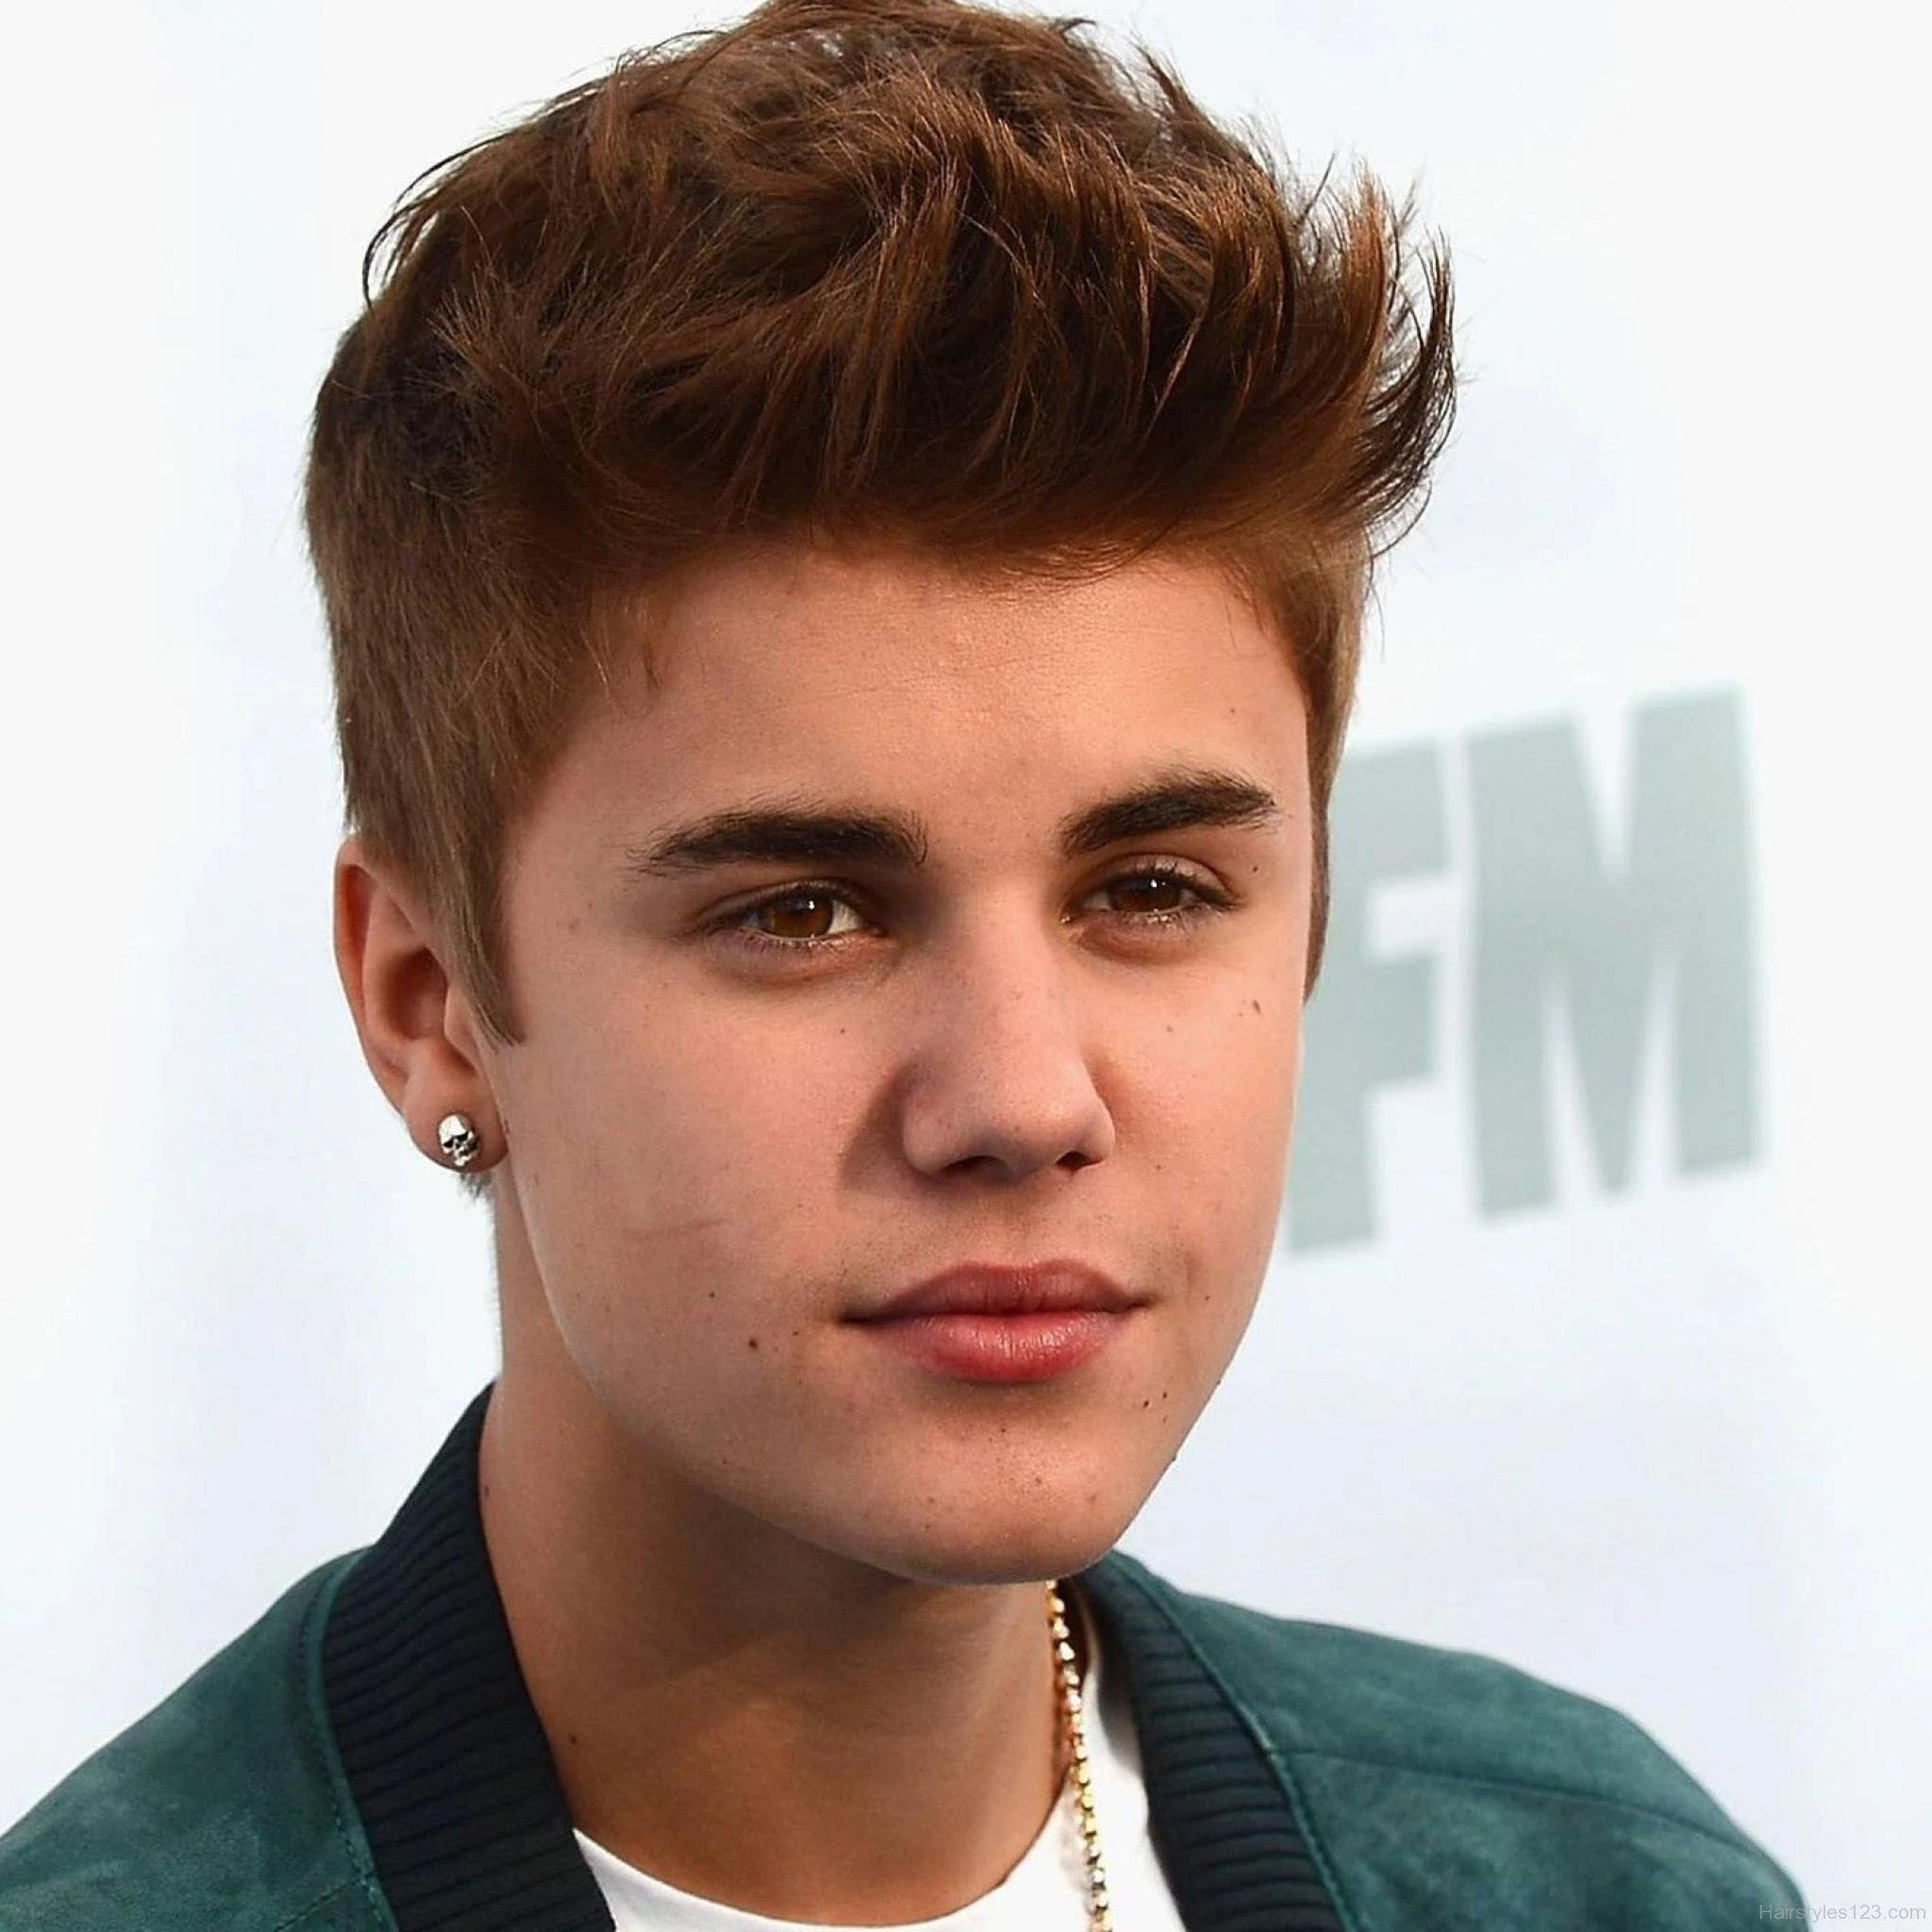 young justin bieber, with auburn hair, bangs styled in upward facing spikes, cool haircuts for boys, he is wearing white t-shirt and green jacket